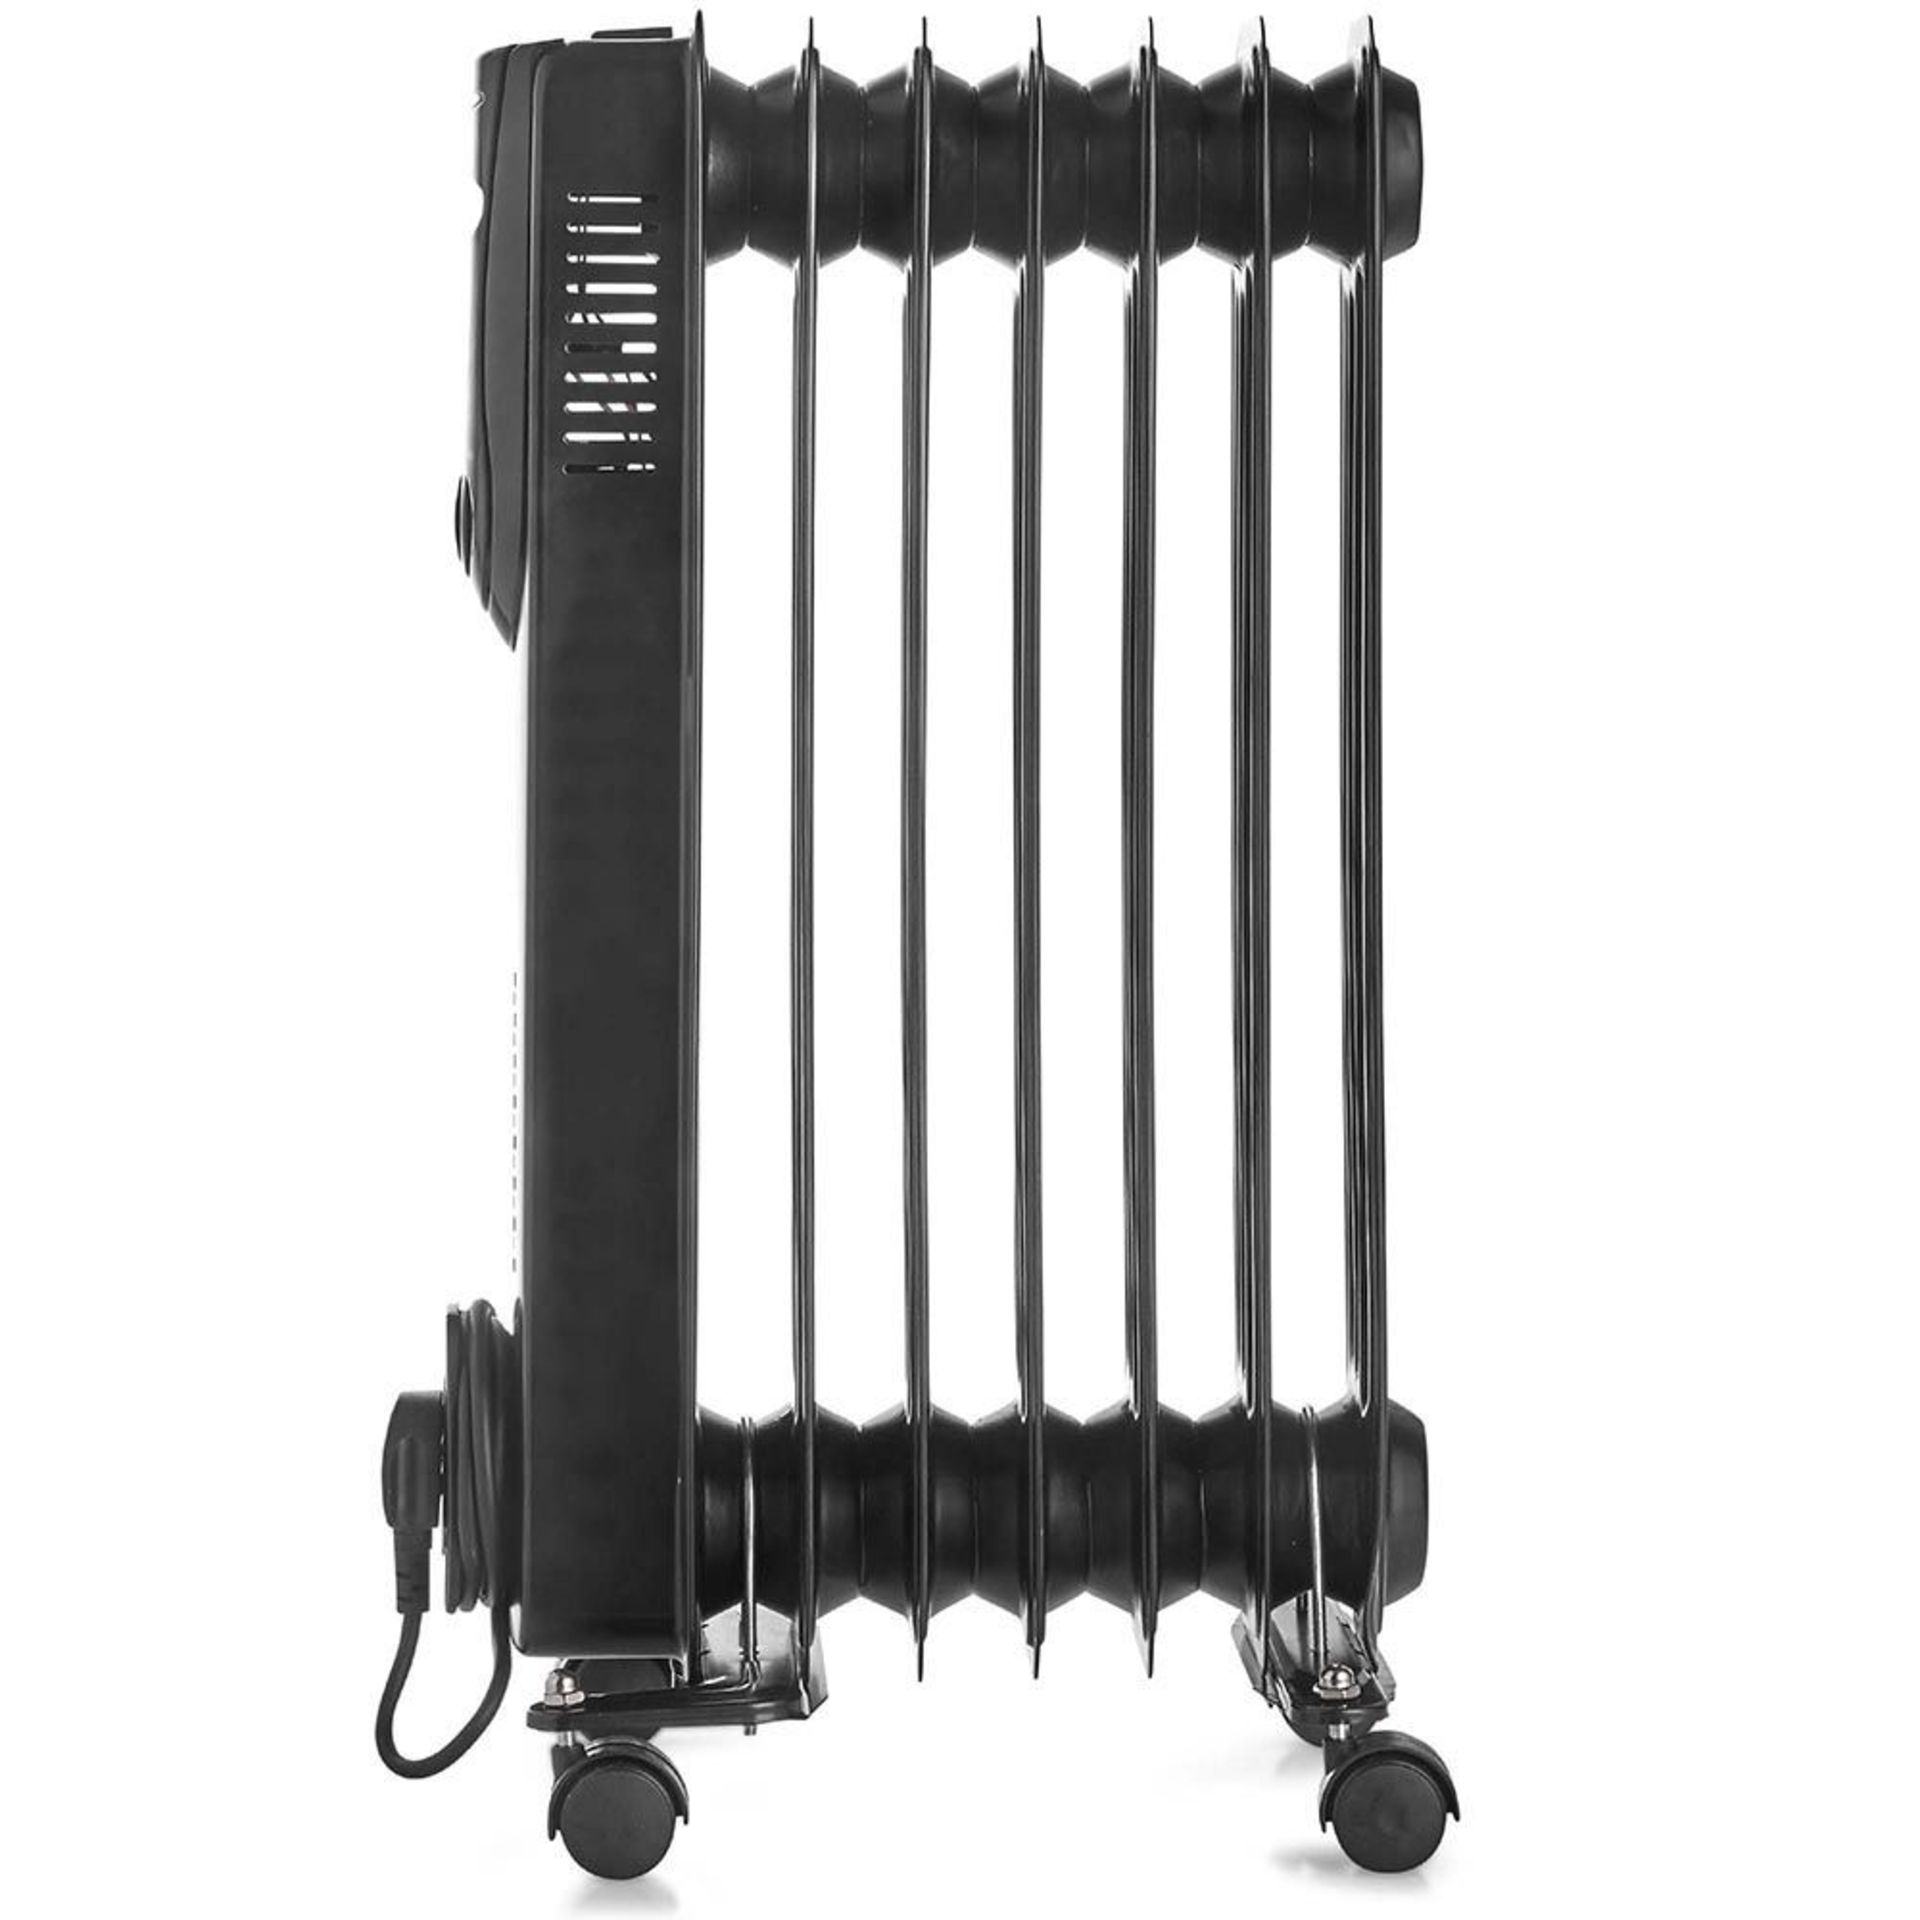 (H132) 7 Fin 1500W Oil Filled Radiator - Black Powerful 1500W radiator with 7 oil-filled fins ... - Image 4 of 4